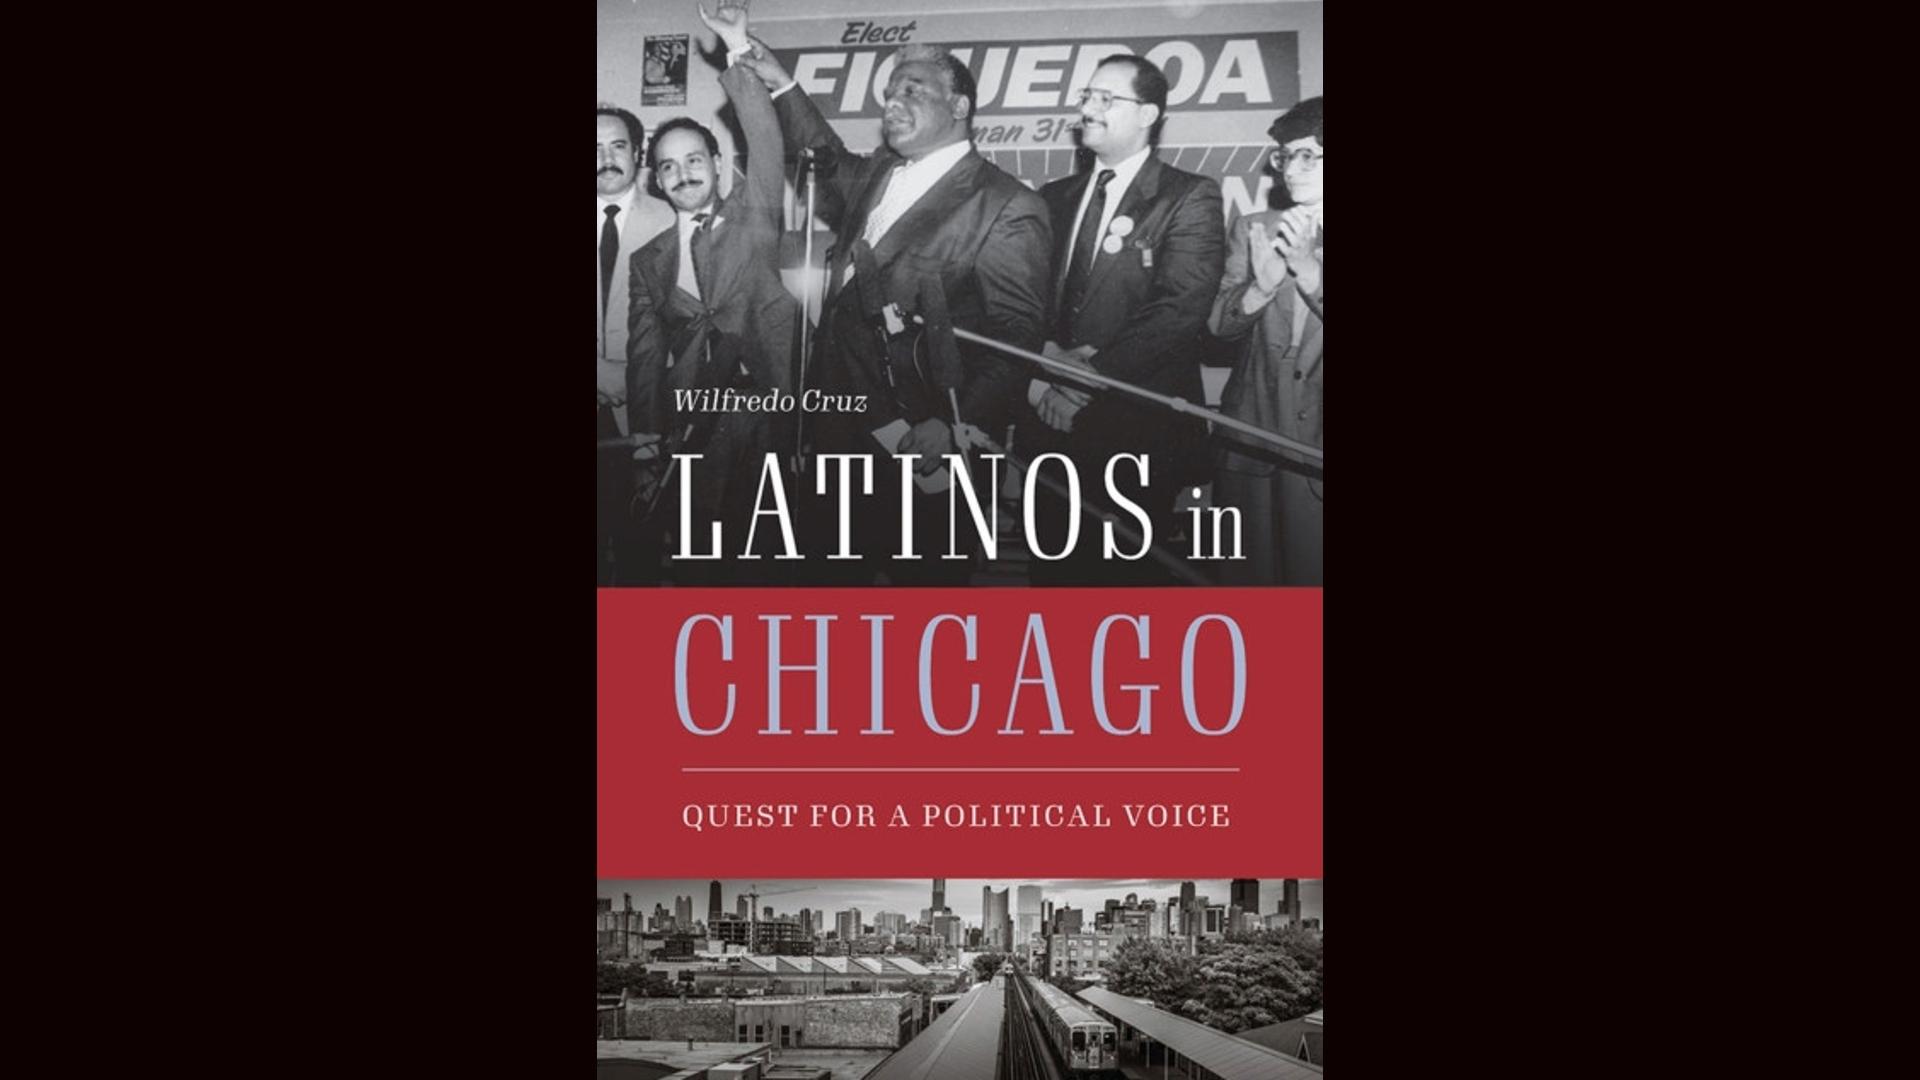 “Latinos in Chicago: Quest for a Political Voice” by Wilfredo Cruz.